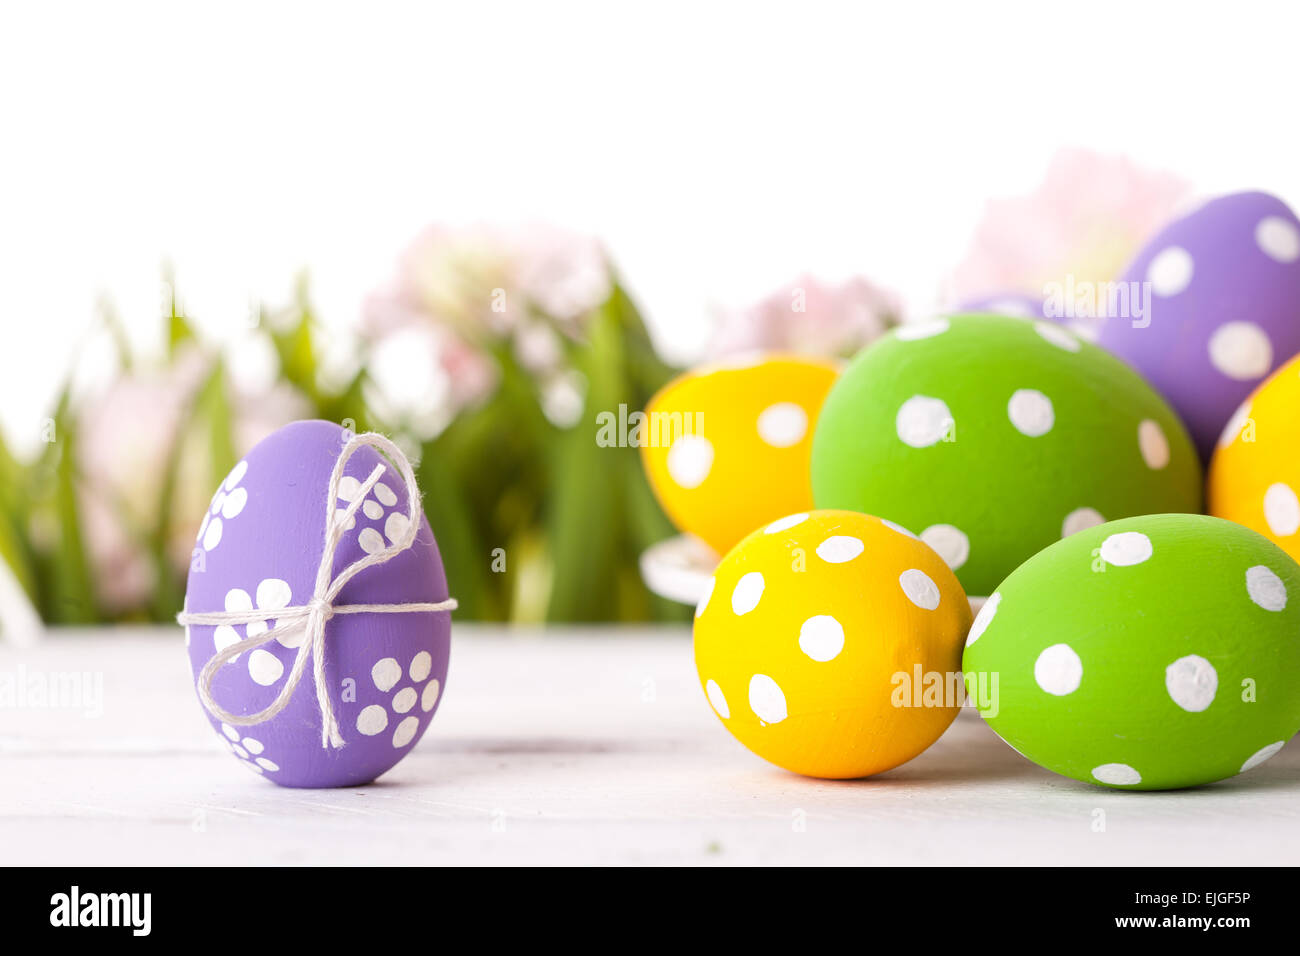 Easter eggs and Fresh Green Grass Stock Photo